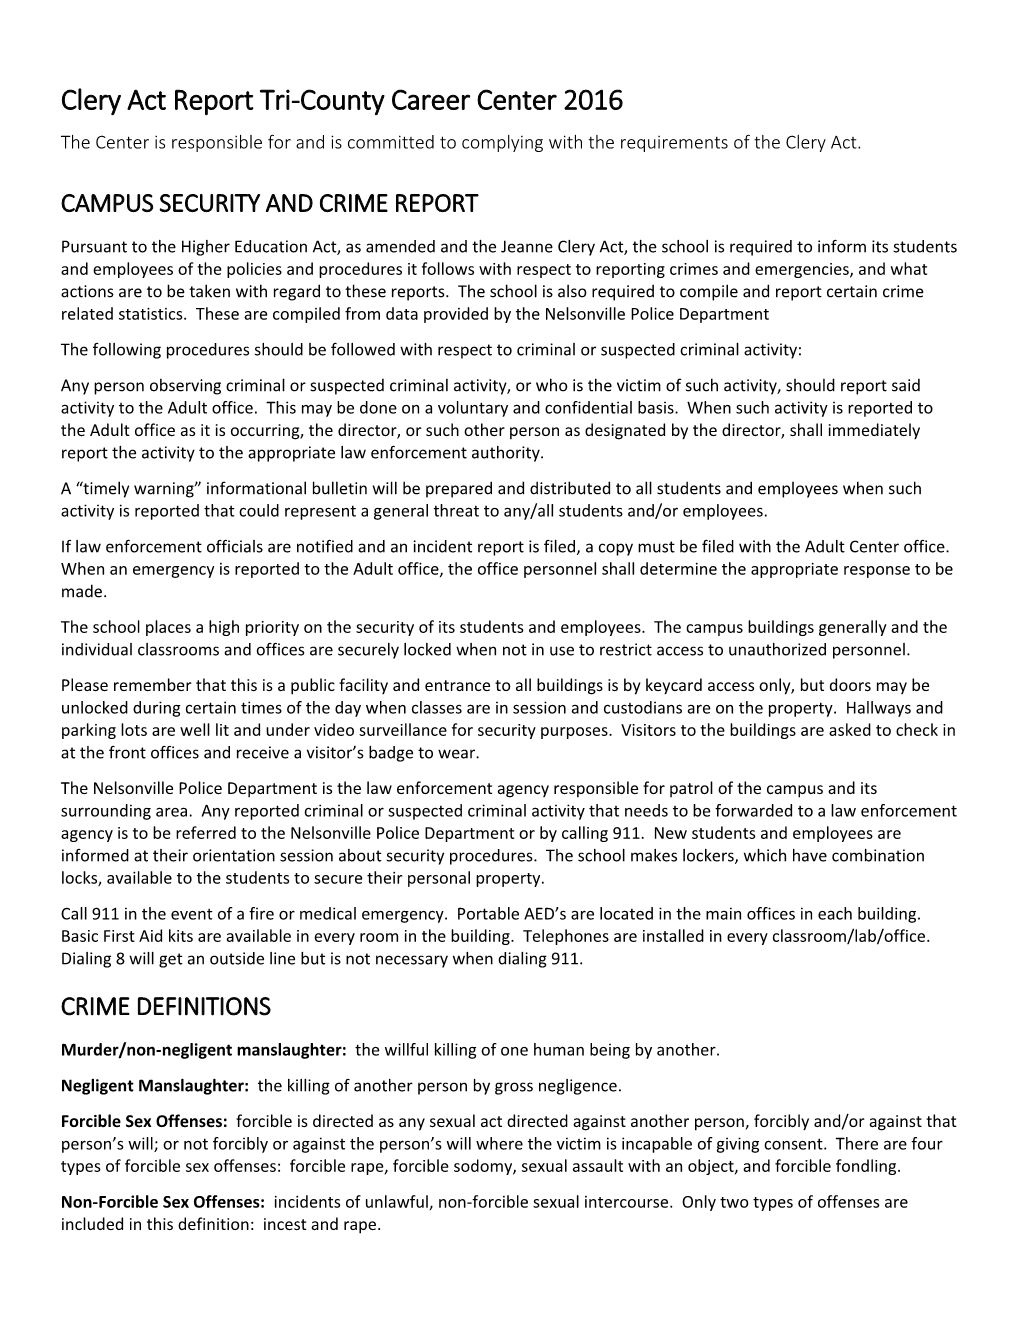 Campus Security and Crime Report